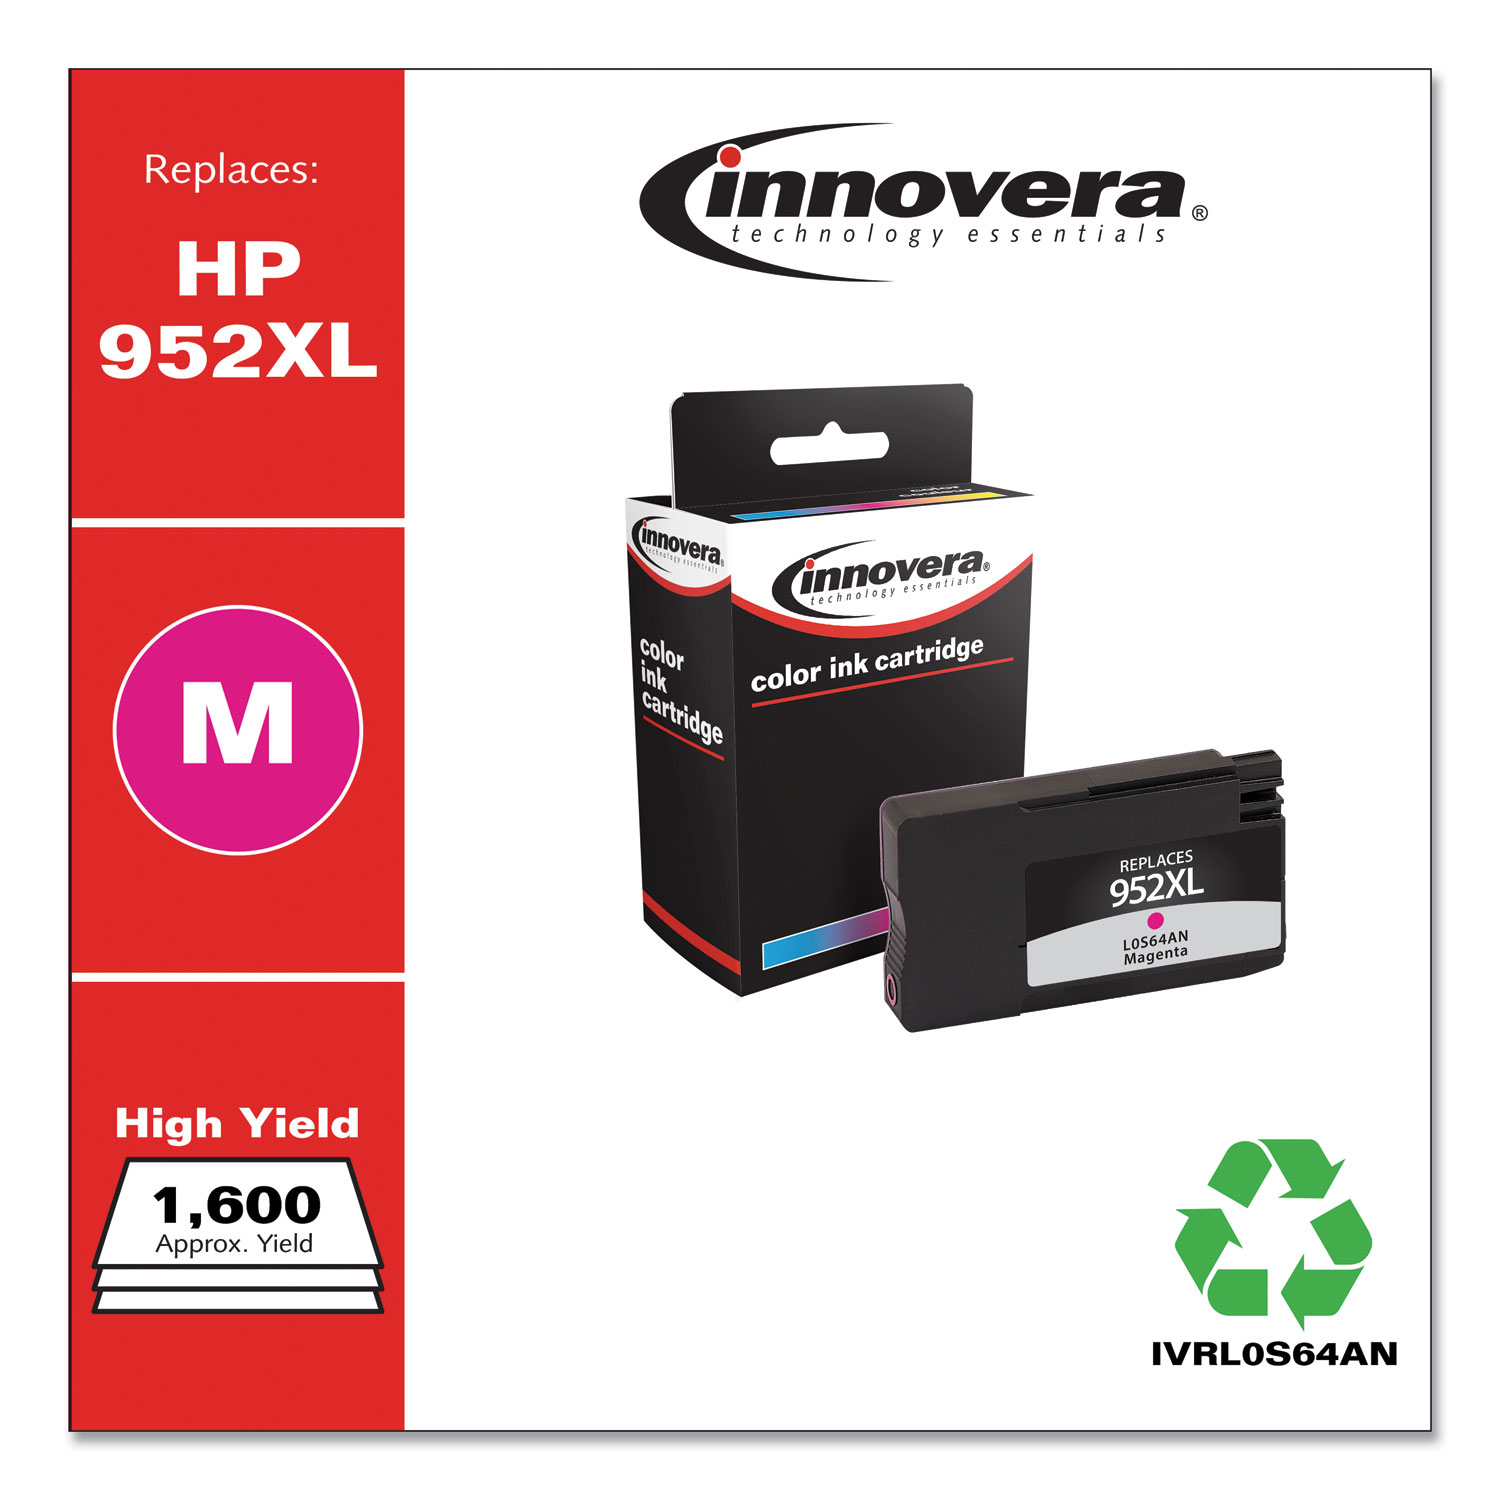  Innovera IVRL0S64AN Remanufactured Magenta High-Yield Ink, Replacement for HP 952XL (L0S64AN), 1,600 Page-Yield (IVRL0S64AN) 